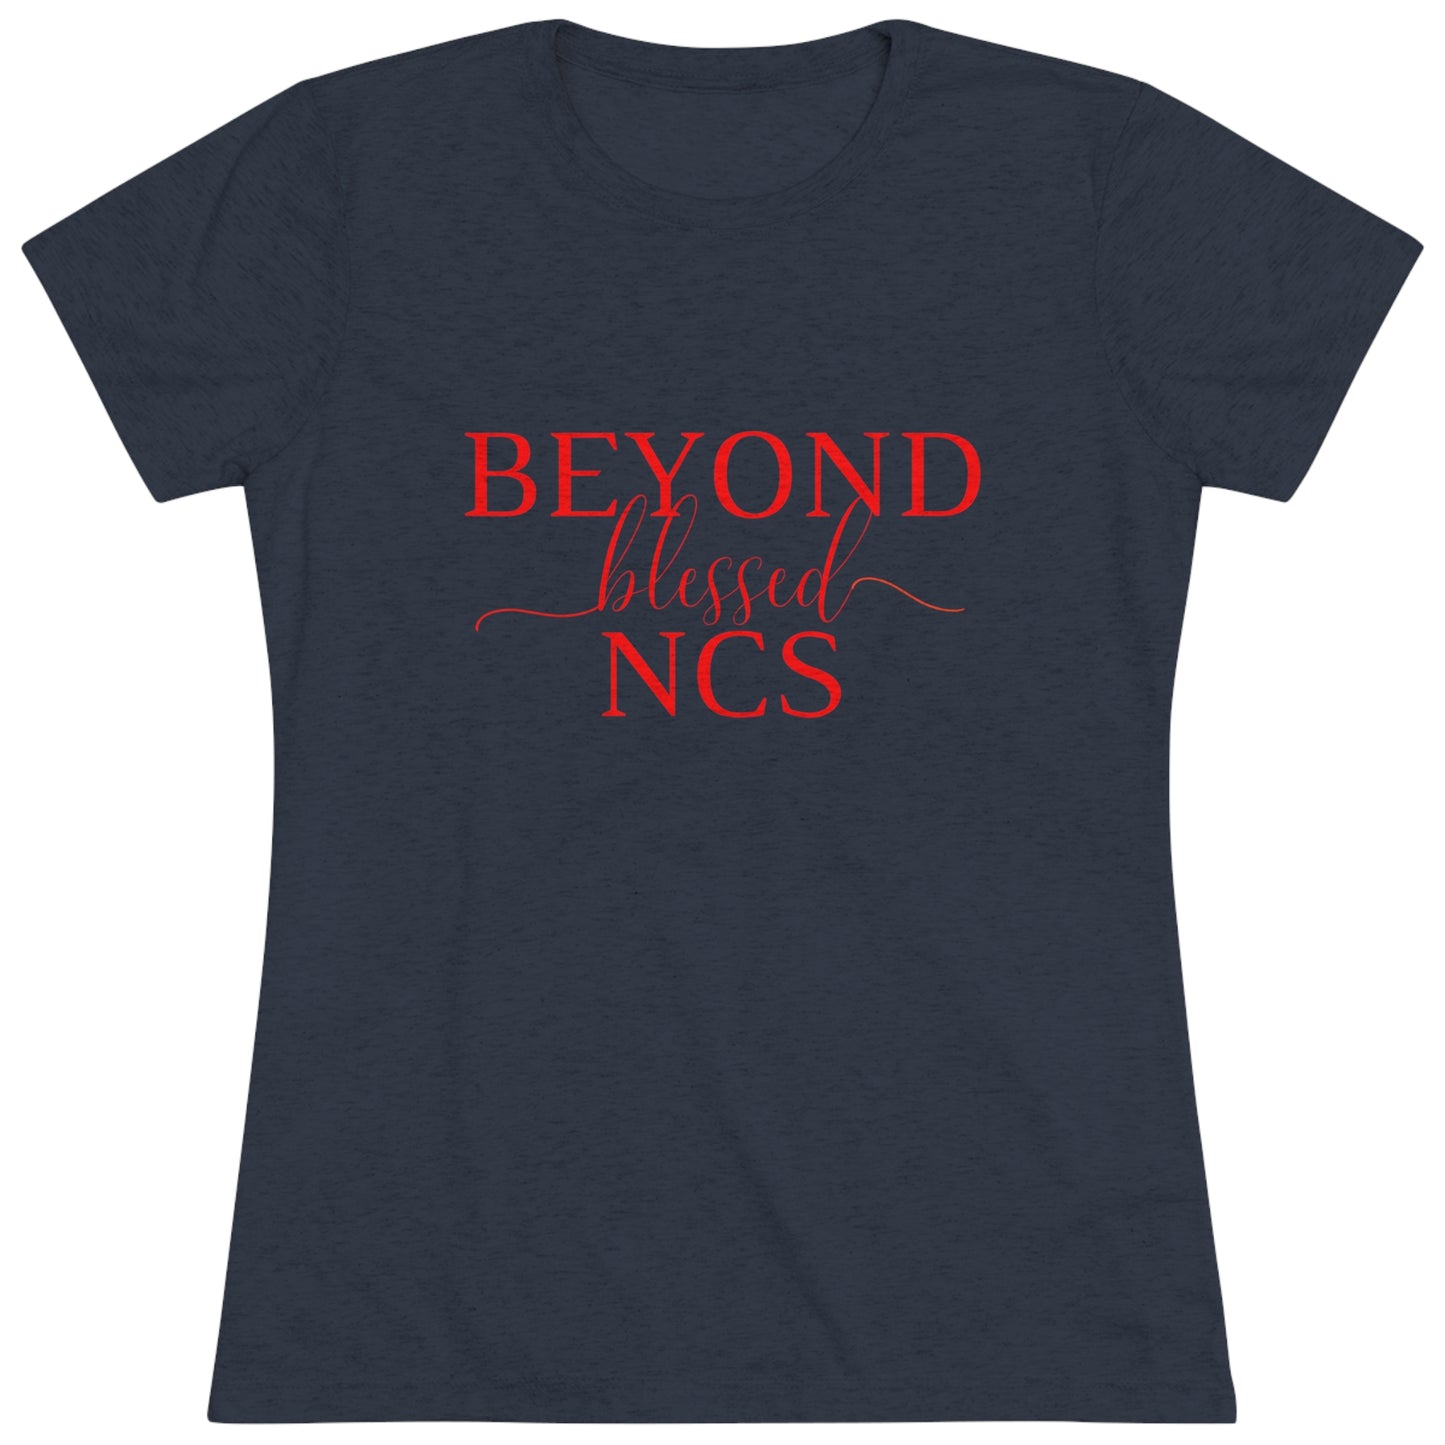 Beyond Blessed NCS - Women's Triblend Tee - Red